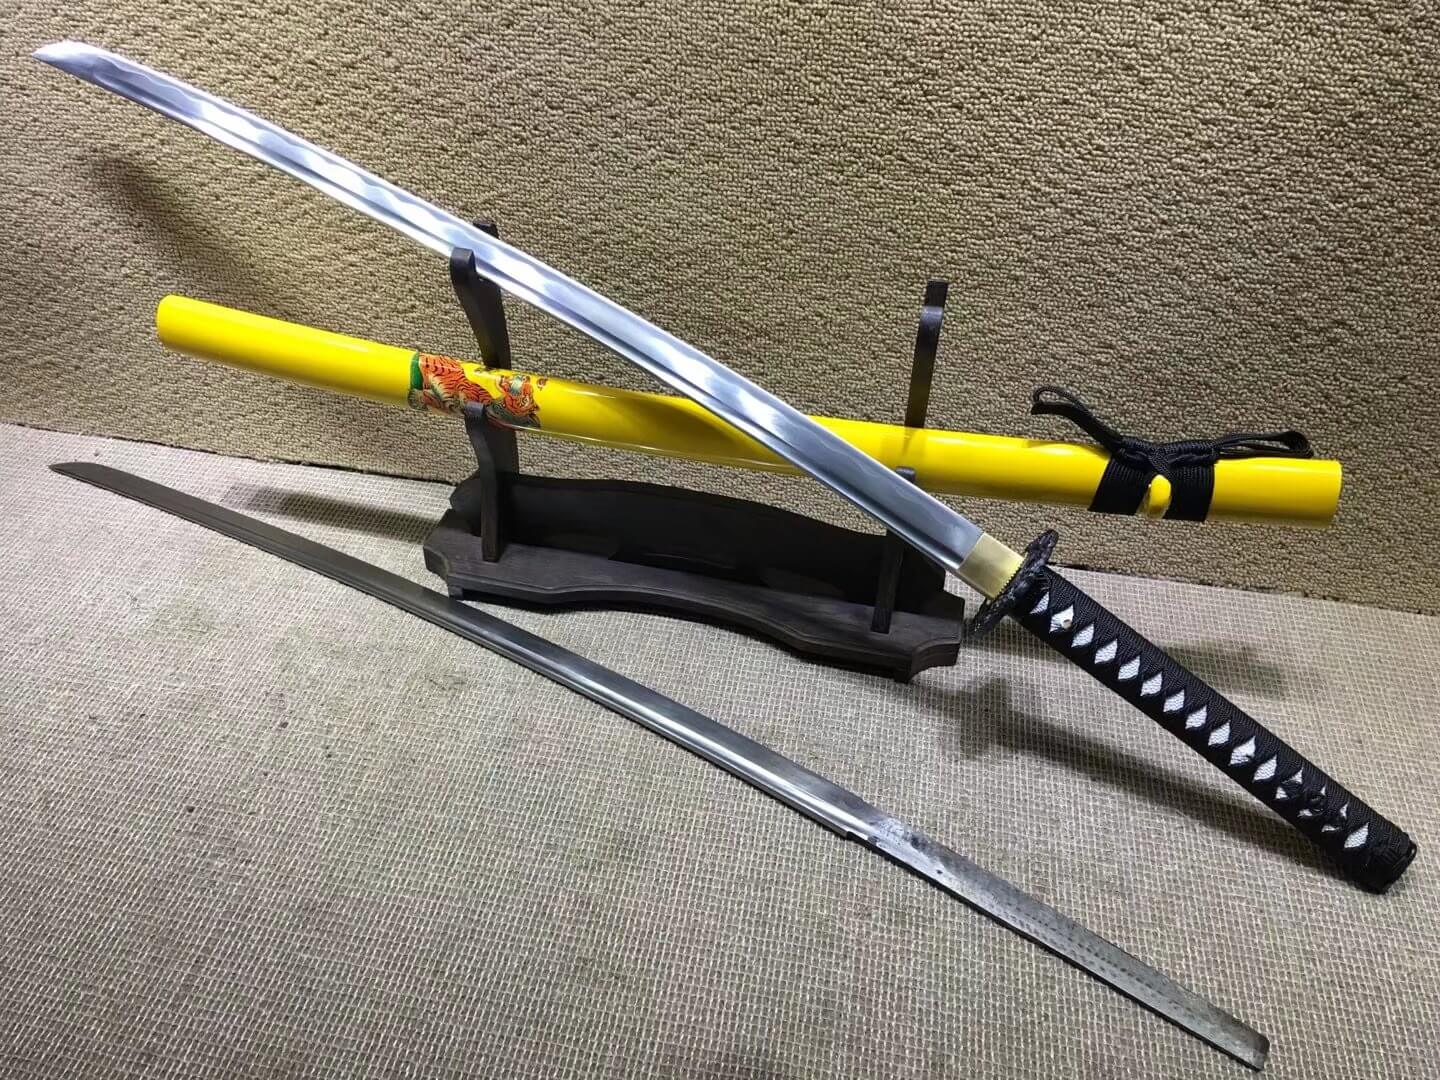 Tiger samurai swords,Medium carbon steel bade,Yellow scabbard,Alloy fitteds - Chinese sword shop